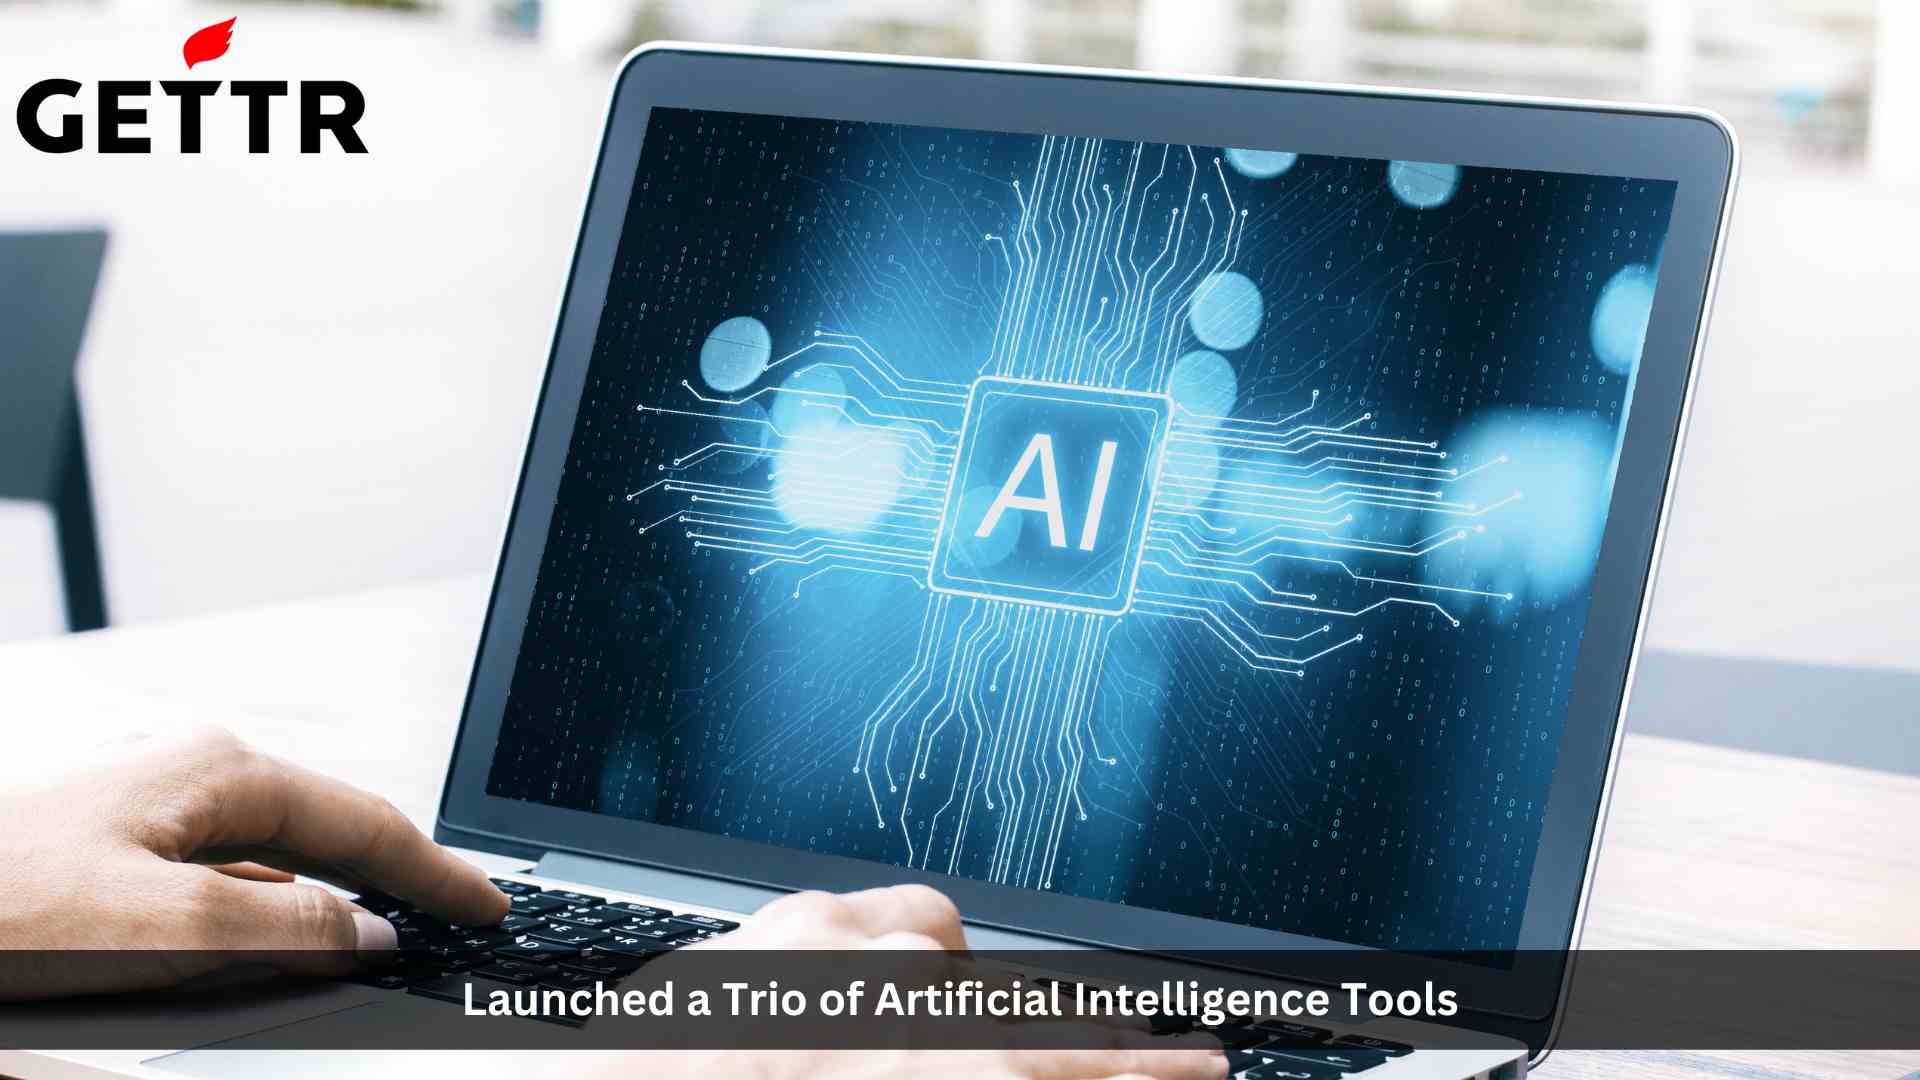 GETTR Rolls Out Trio of AI Tools to Empower Social Media Users and Creators